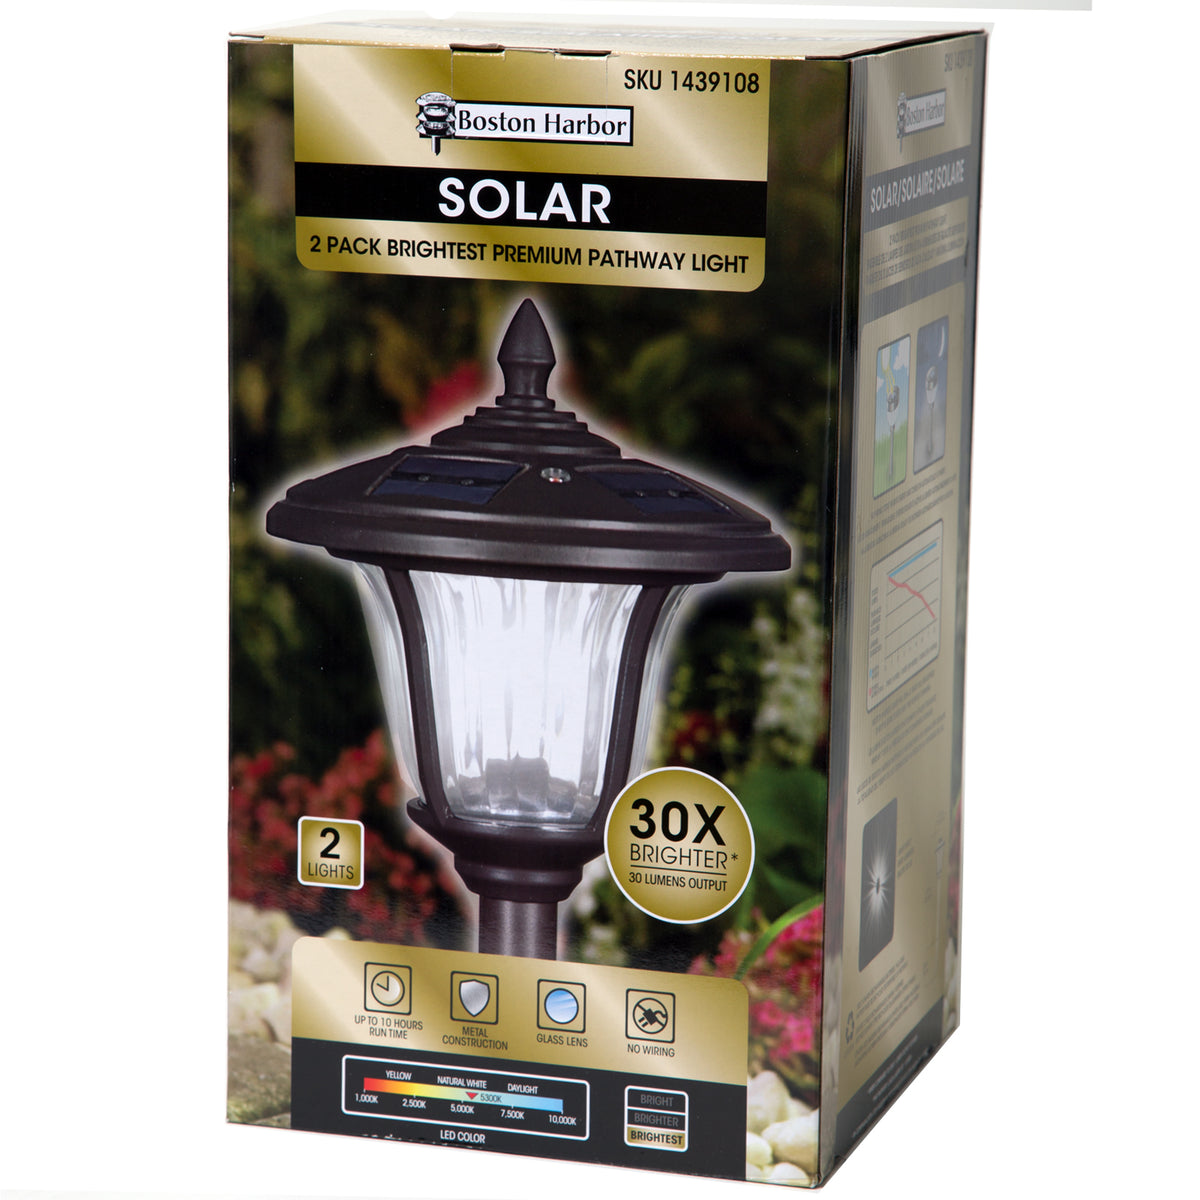 buy solar powered lights at cheap rate in bulk. wholesale & retail lawn & garden lighting & décor store.